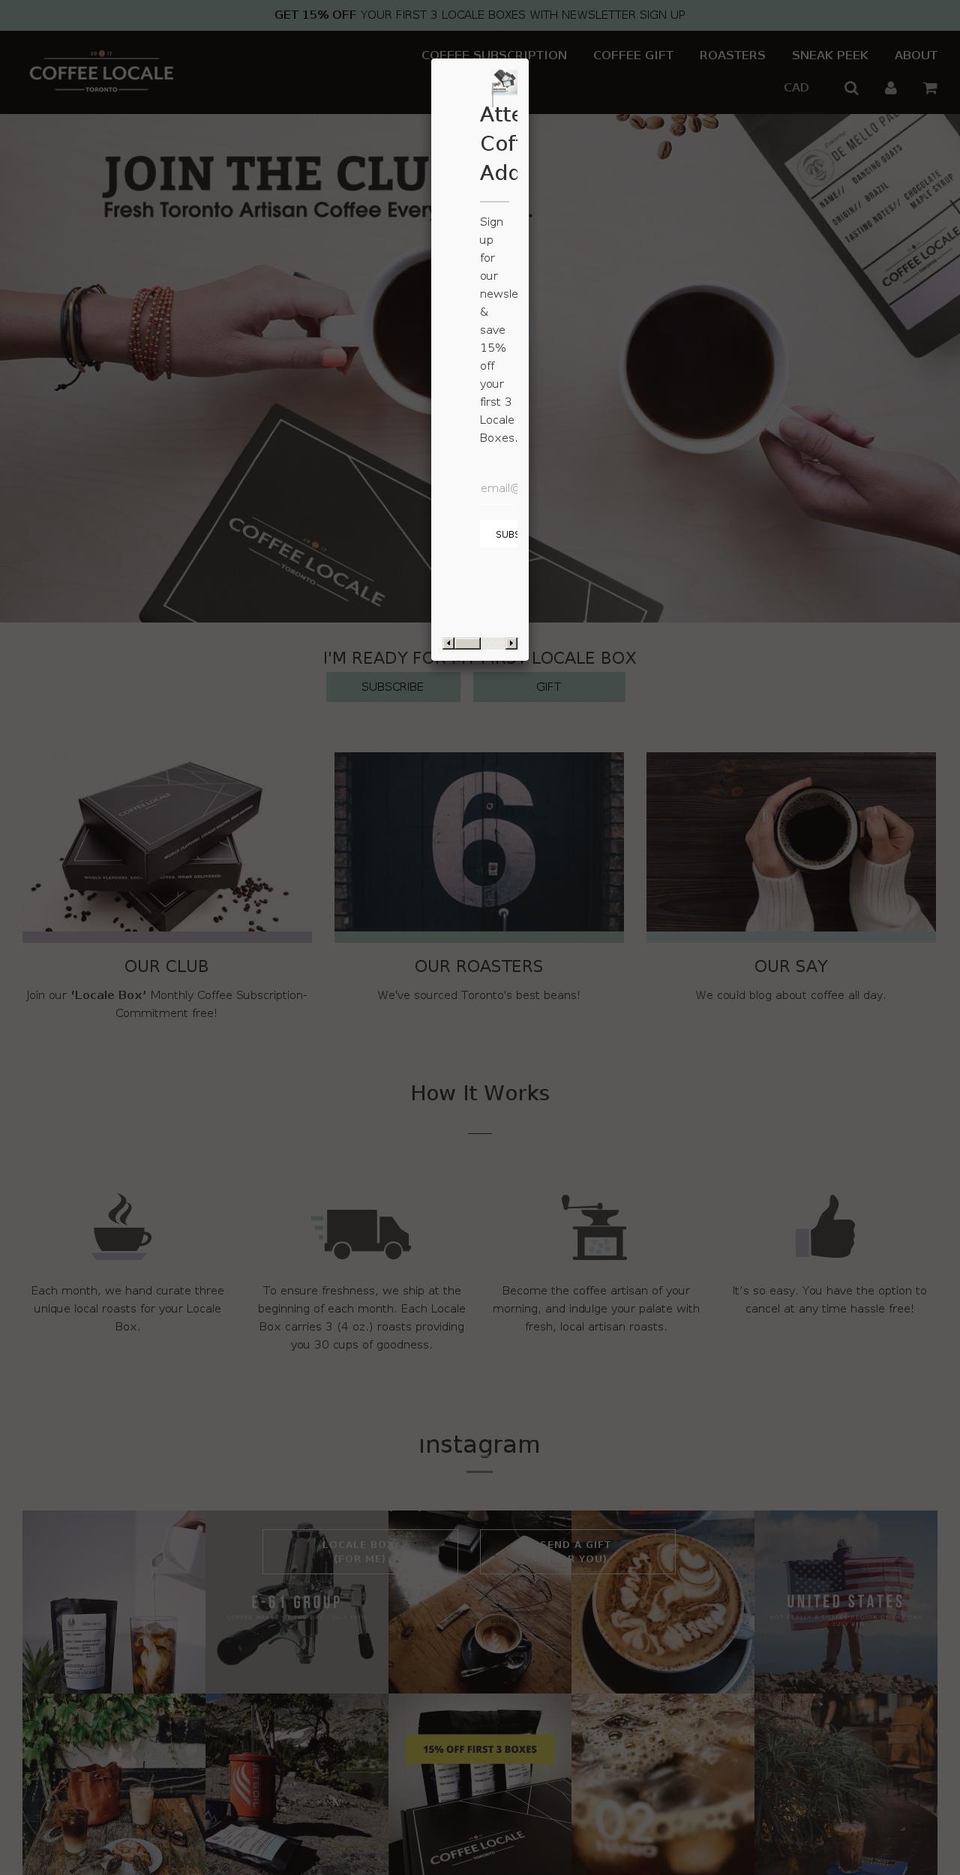 Coffee Shopify theme site example coffeelocale.com